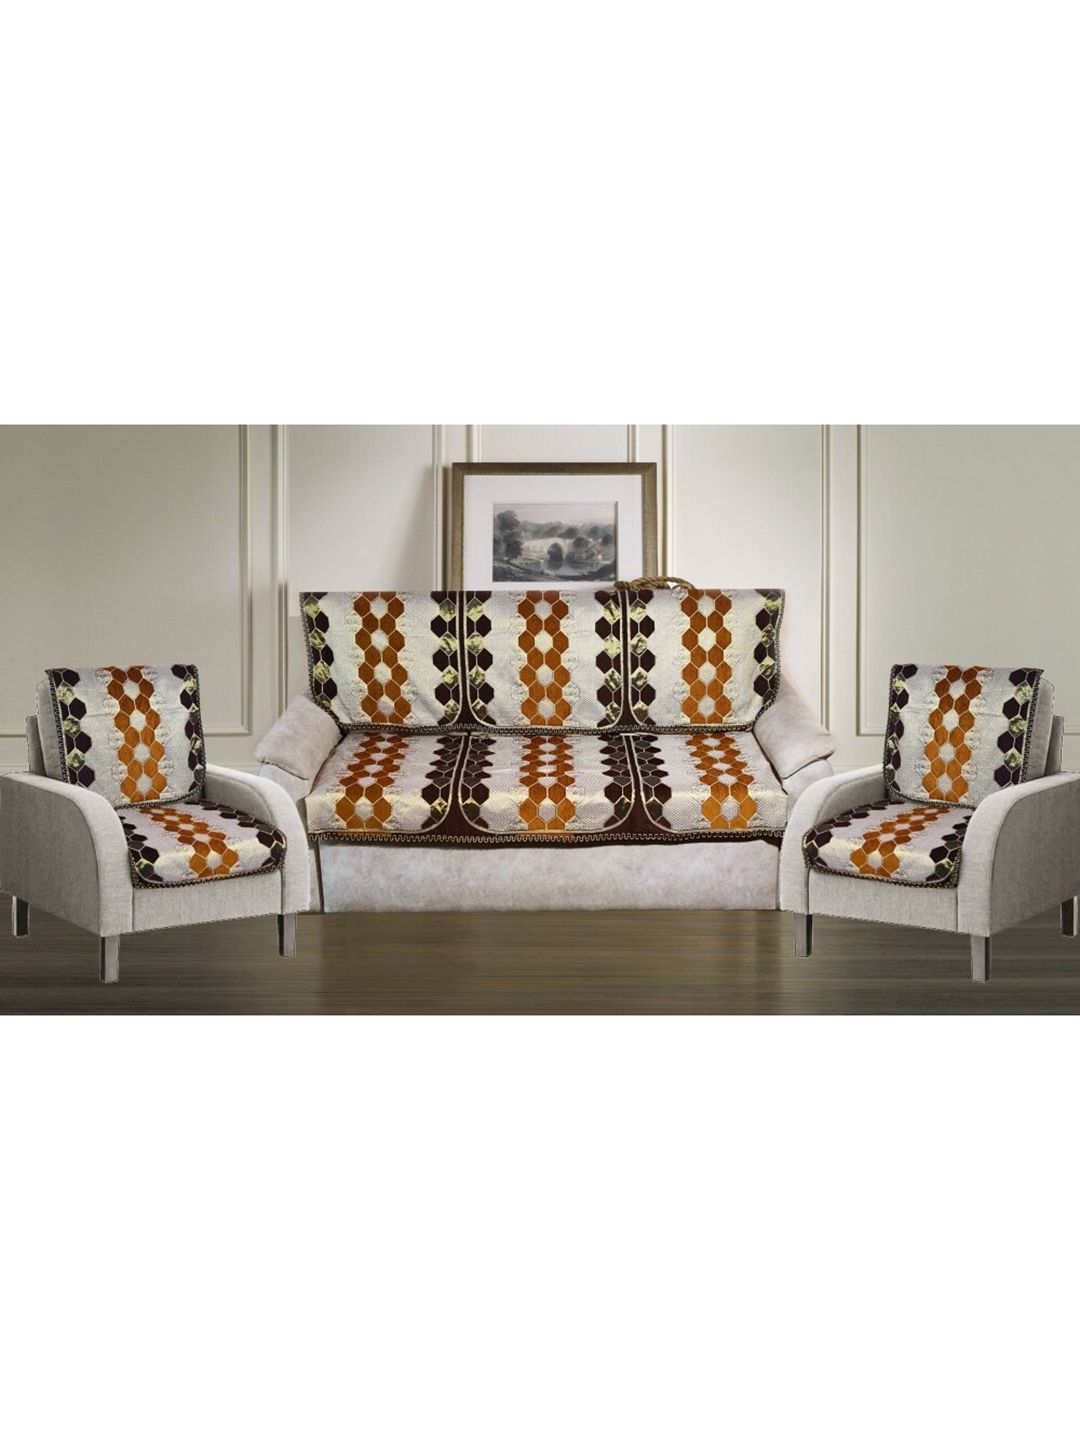 GRIIHAM Brown & Beige Jacquard Pack of 5 Seater Sofa Cover Price in India